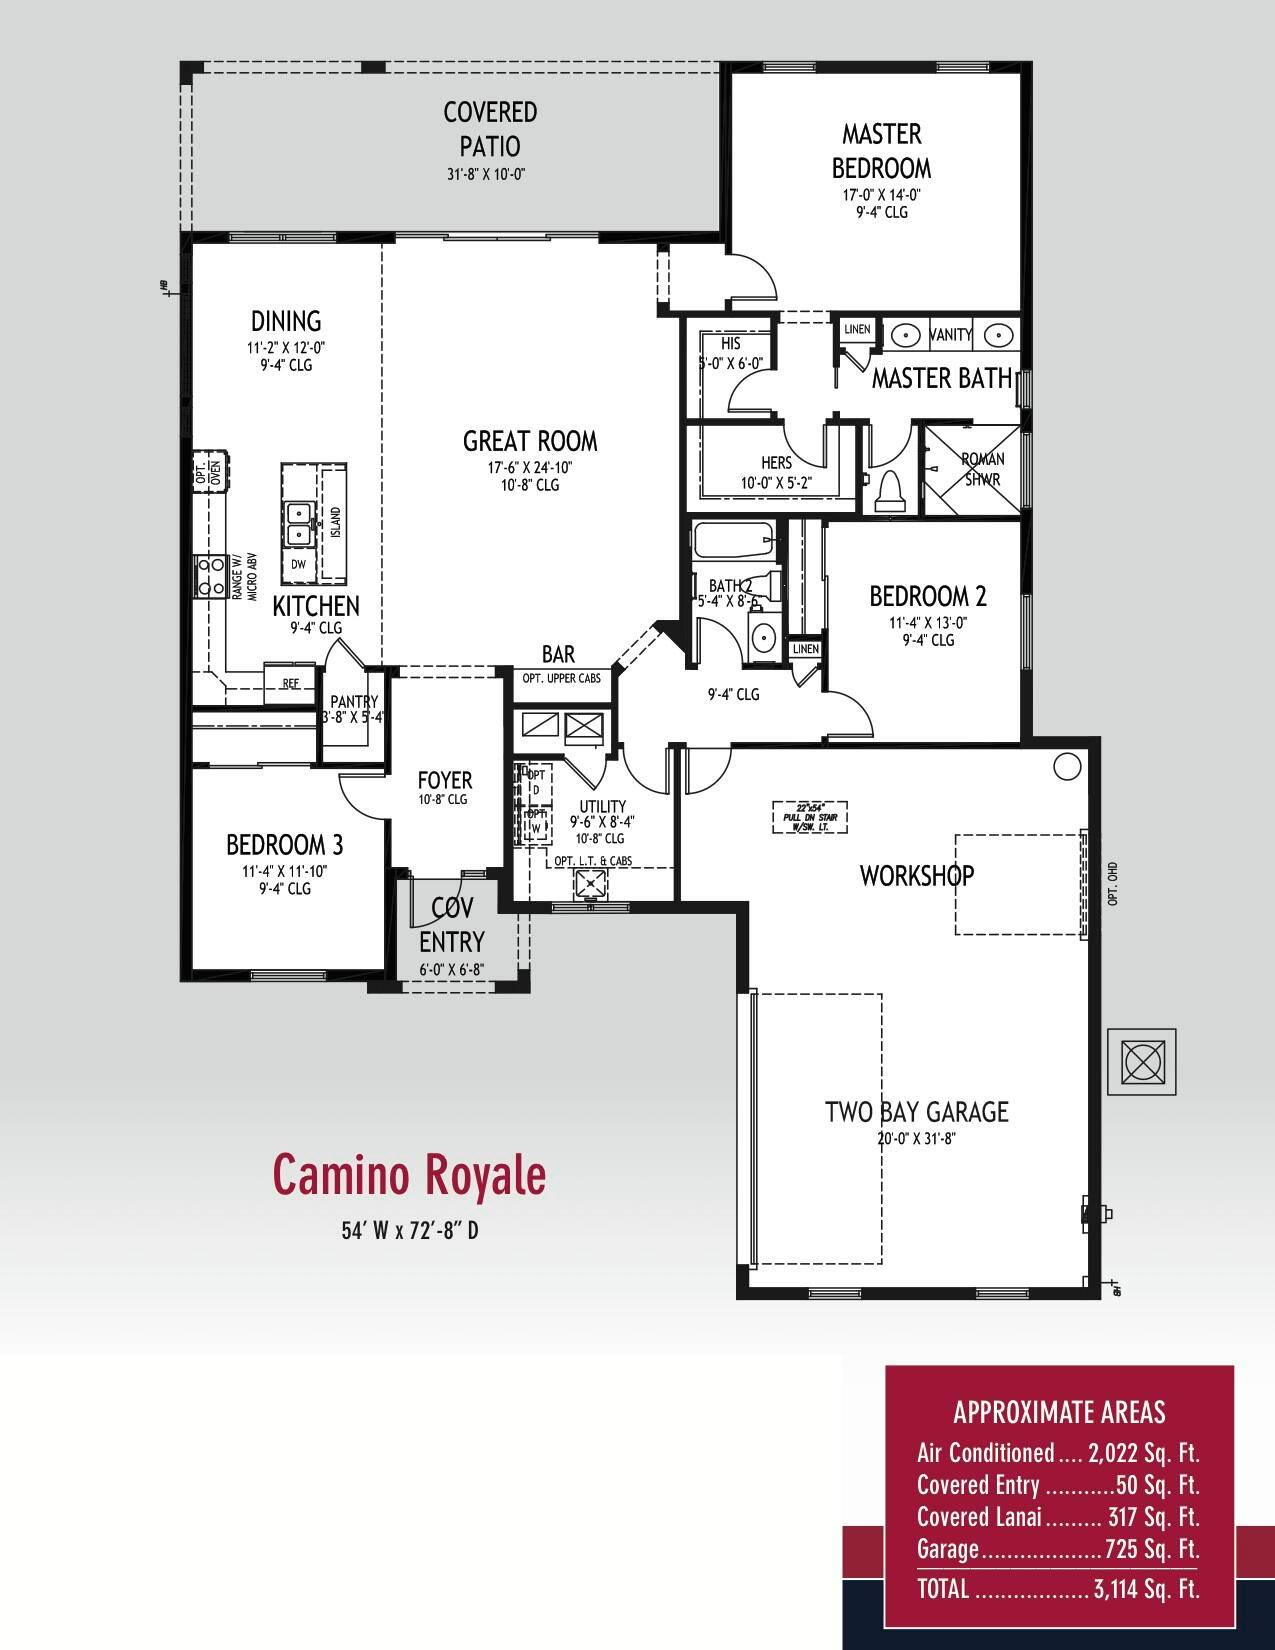 Permit Ready for the popular Camino Royale floorplan.